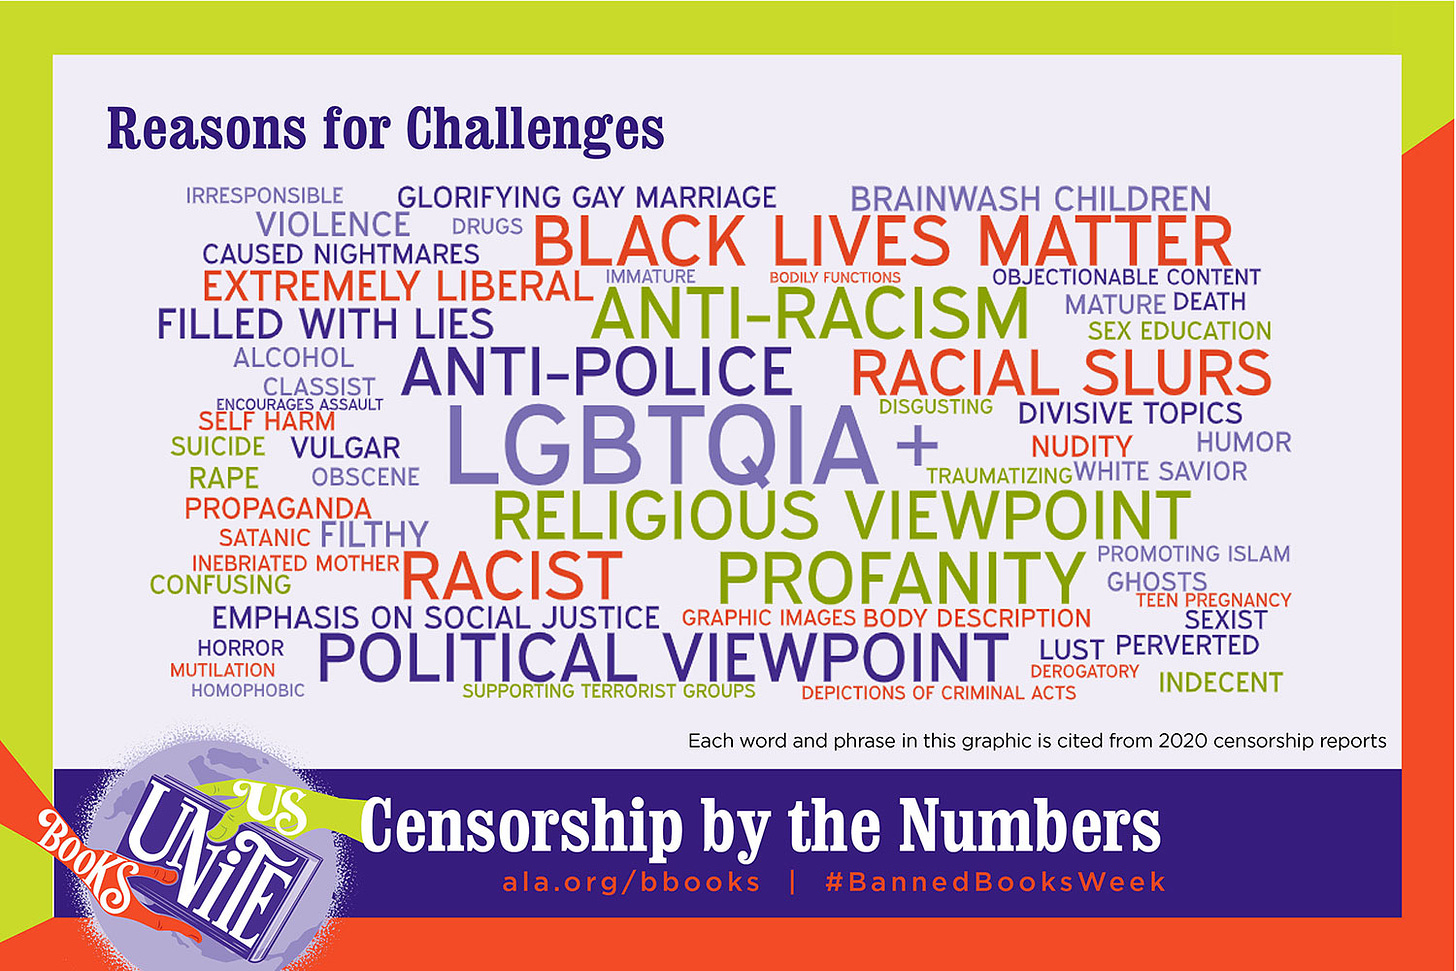 word cloud of reasons for challenges to books, mostly re antiracist and queer-positive content